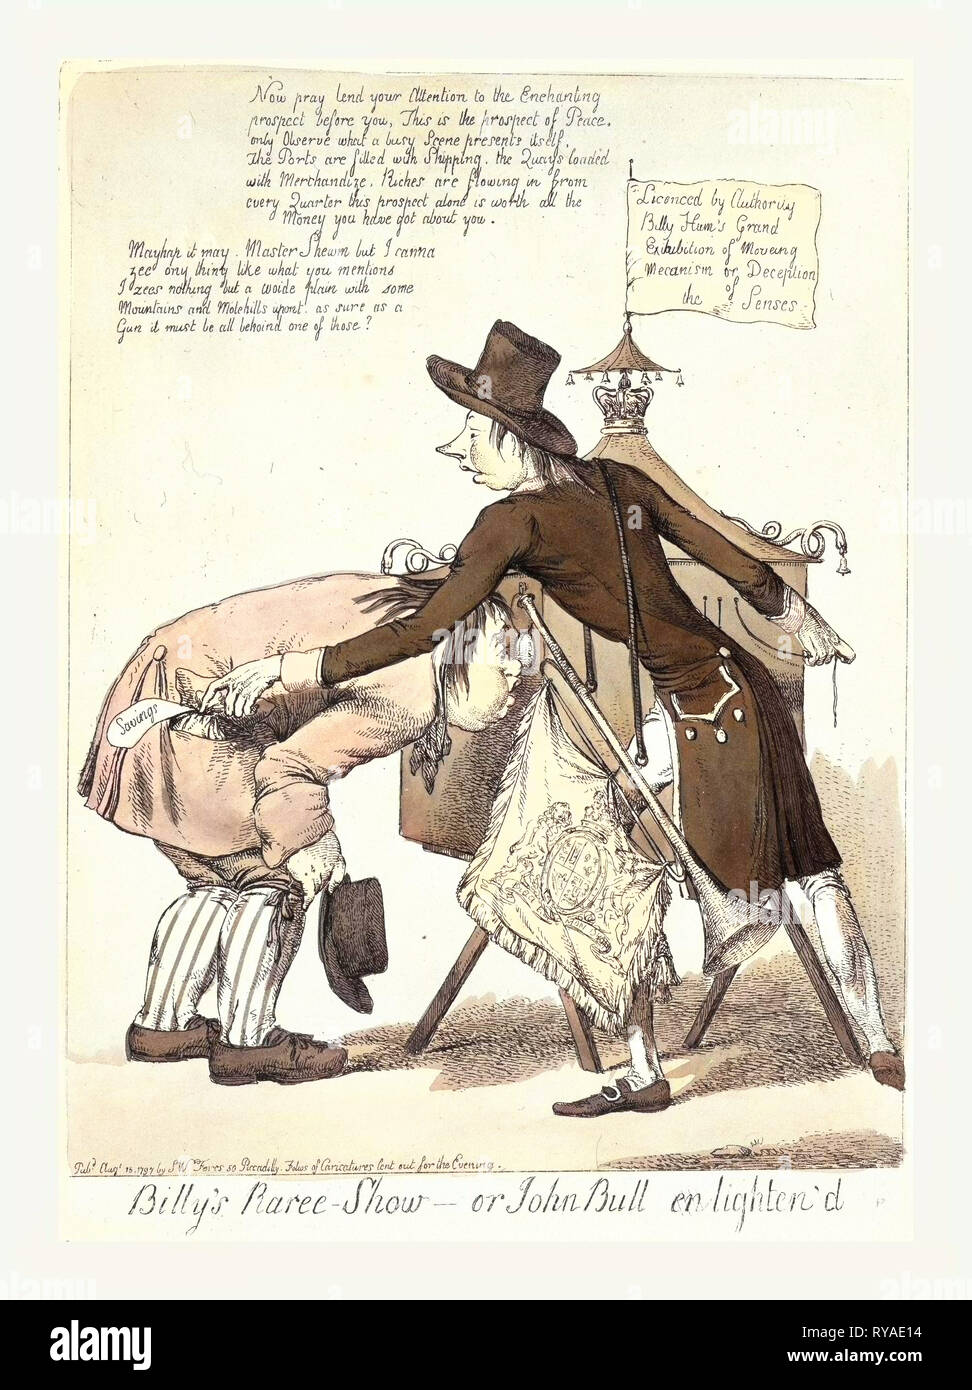 Billy's Raree-Show or John Bull En Lighten'D, [England], Engraving 1797, Pitt, As a Peep-Show Man, Stands by His Box, which is Supported on Trestles Stock Photo